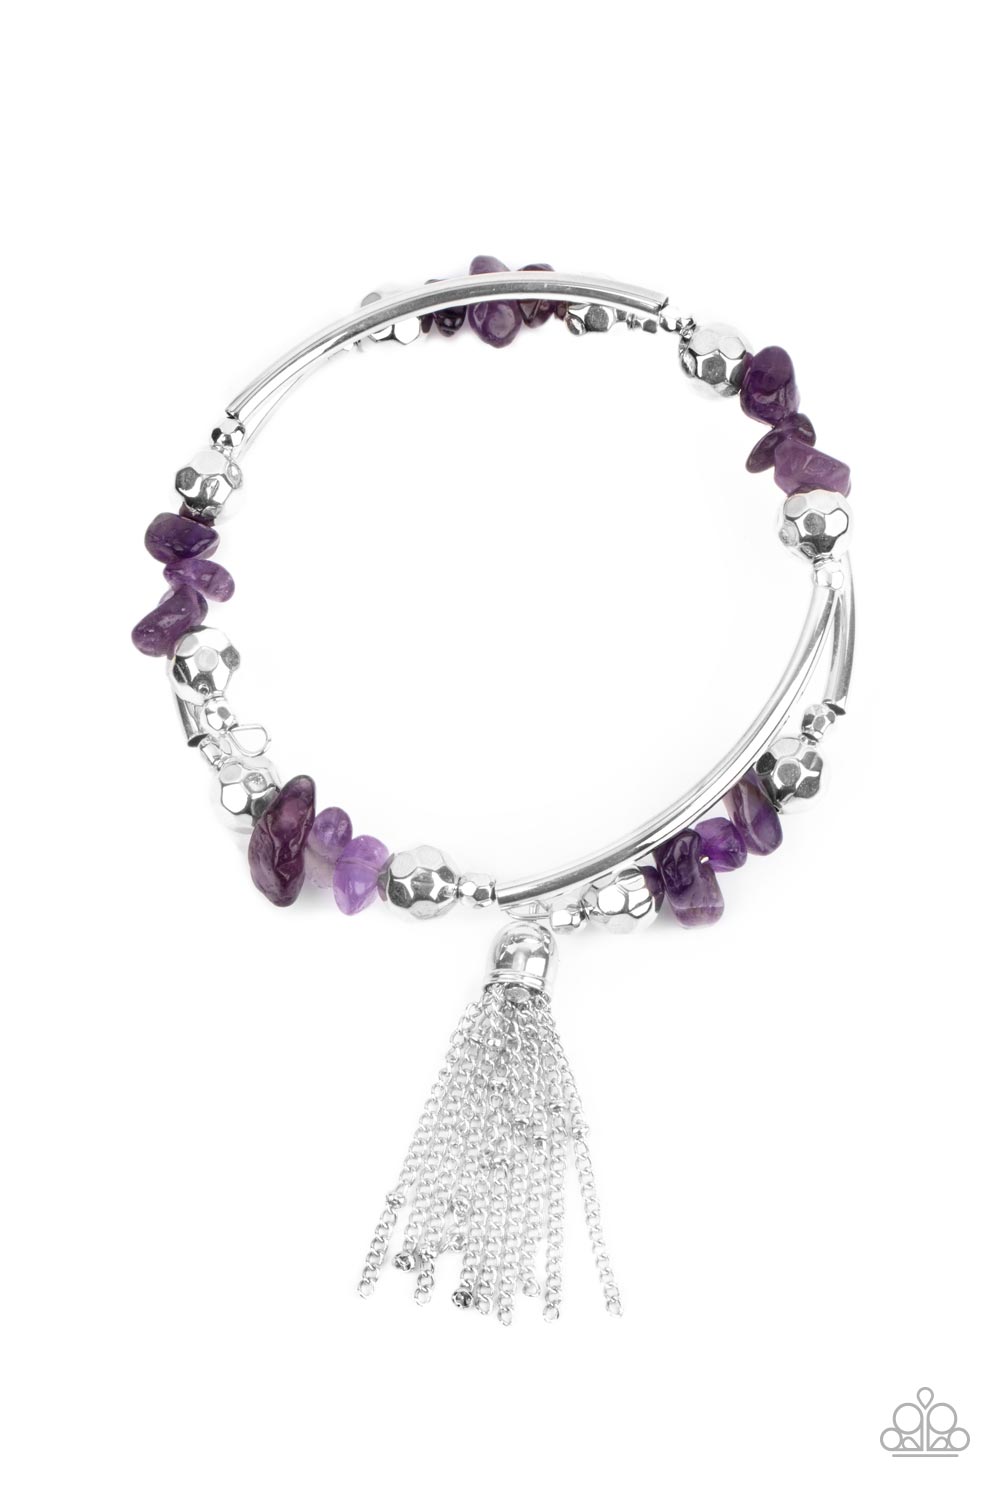 Mineral Mosaic Purple Coil Bracelet - Paparazzi Accessories  Infused with a shimmery silver chain tassel, an earthy collection of faceted silver beads, raw cut amethyst stone beads, and cylindrical silver accents are threaded along a coiled wire around the wrist for a grounding pop of color.  All Paparazzi Accessories are lead free and nickel free!  Sold as one individual bracelet.